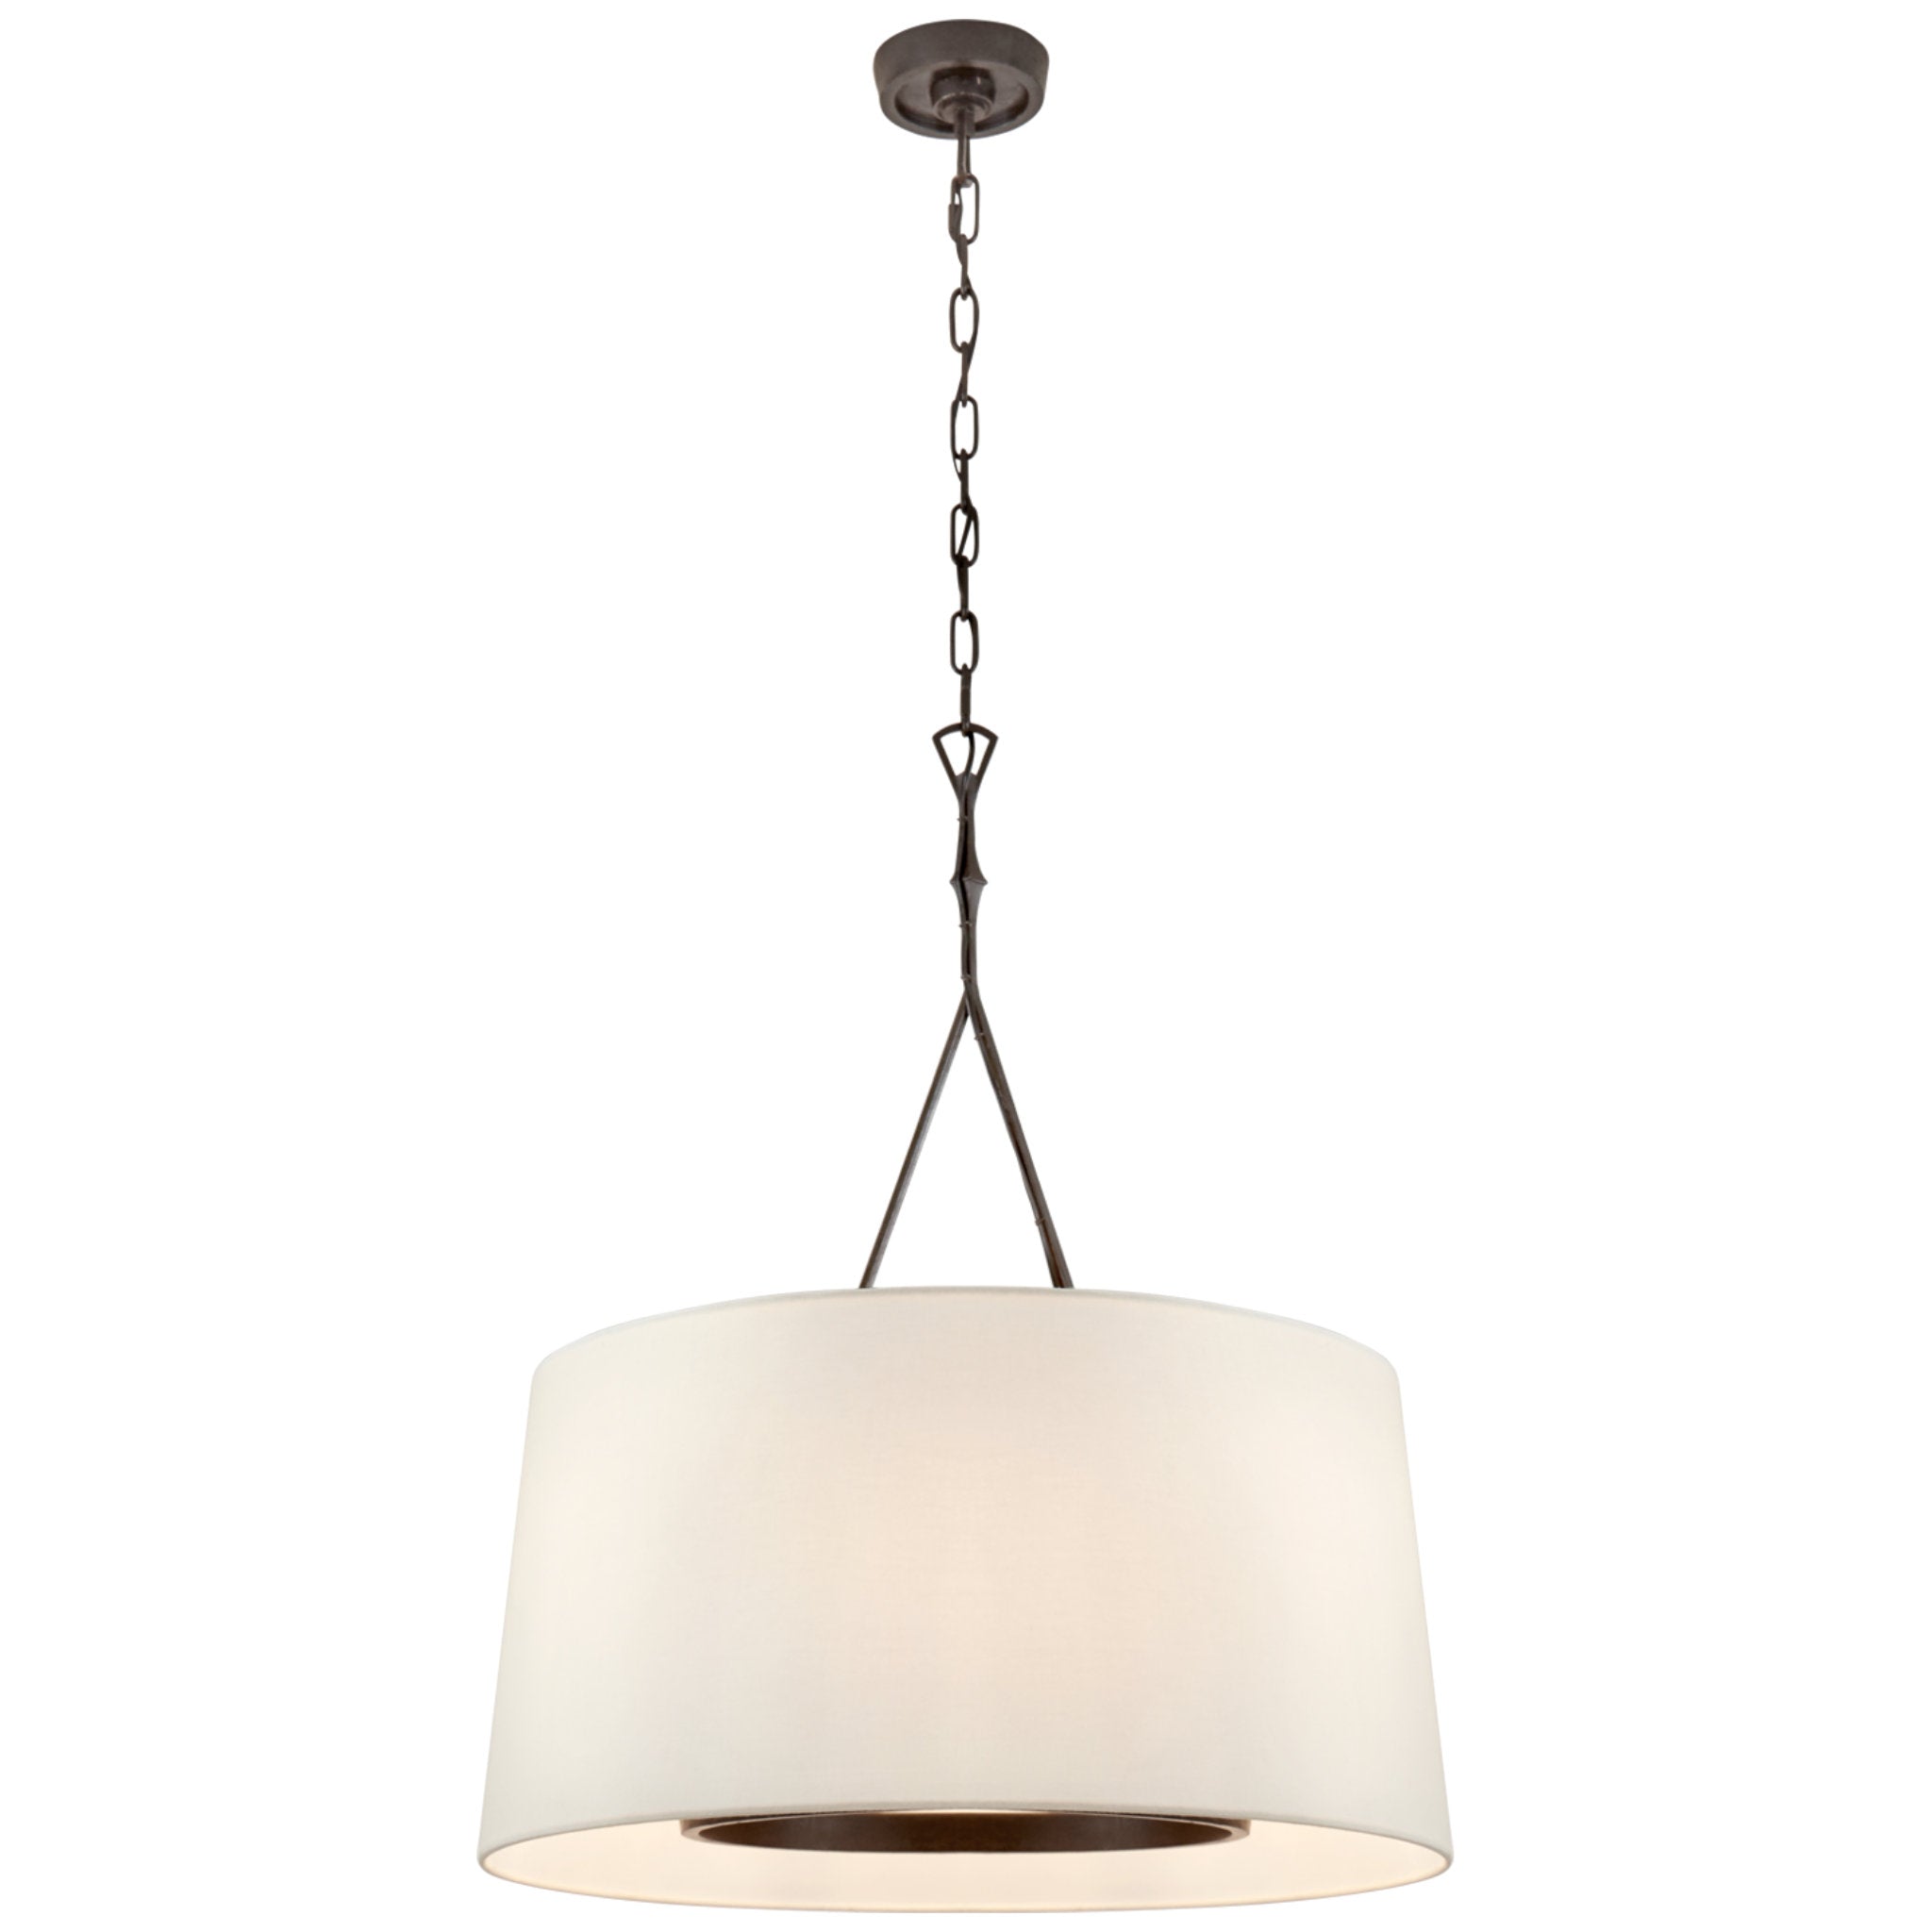 Visual Comfort Dauphine Large Hanging Shade in Aged Iron with Linen Shade